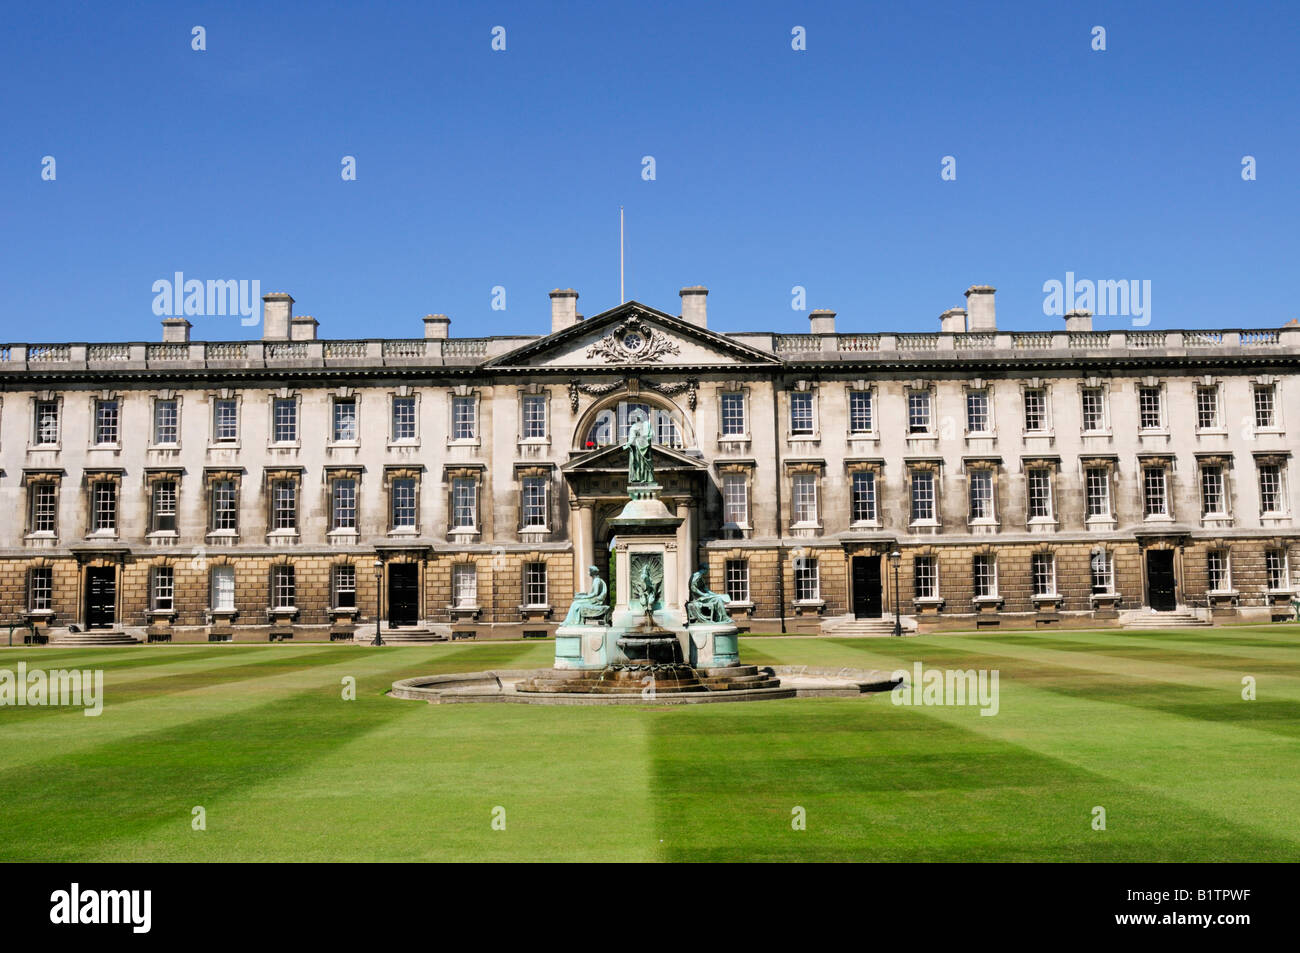 Statue of Henry IV and the Gibbs Building, Kings College Cambridge England UK Stock Photo